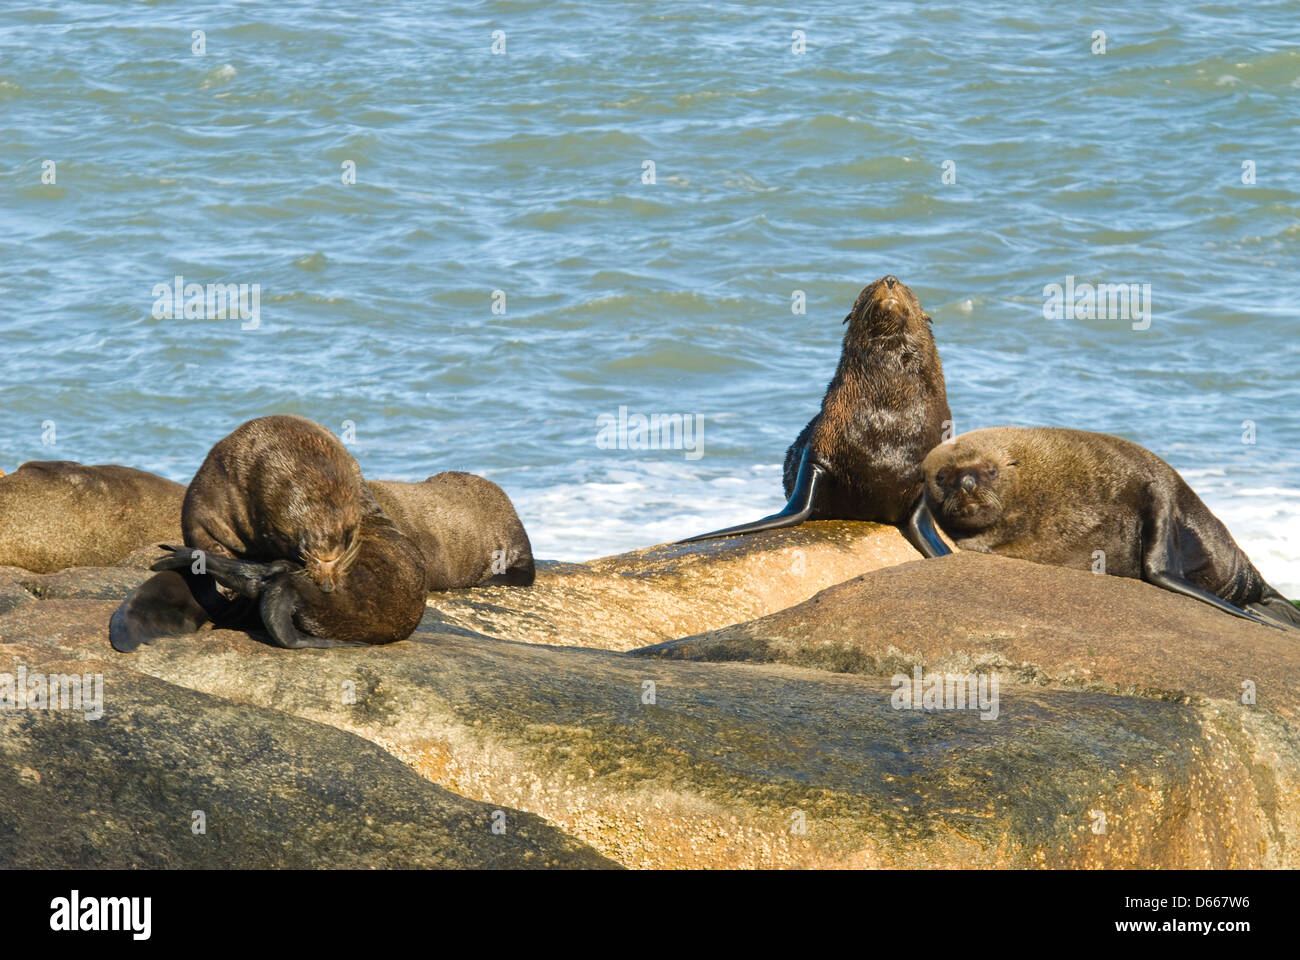 Southern sea lions (Otaria flavescens) basking on rocks at Cabo Polonio in Rocha Uruguay, South America Stock Photo